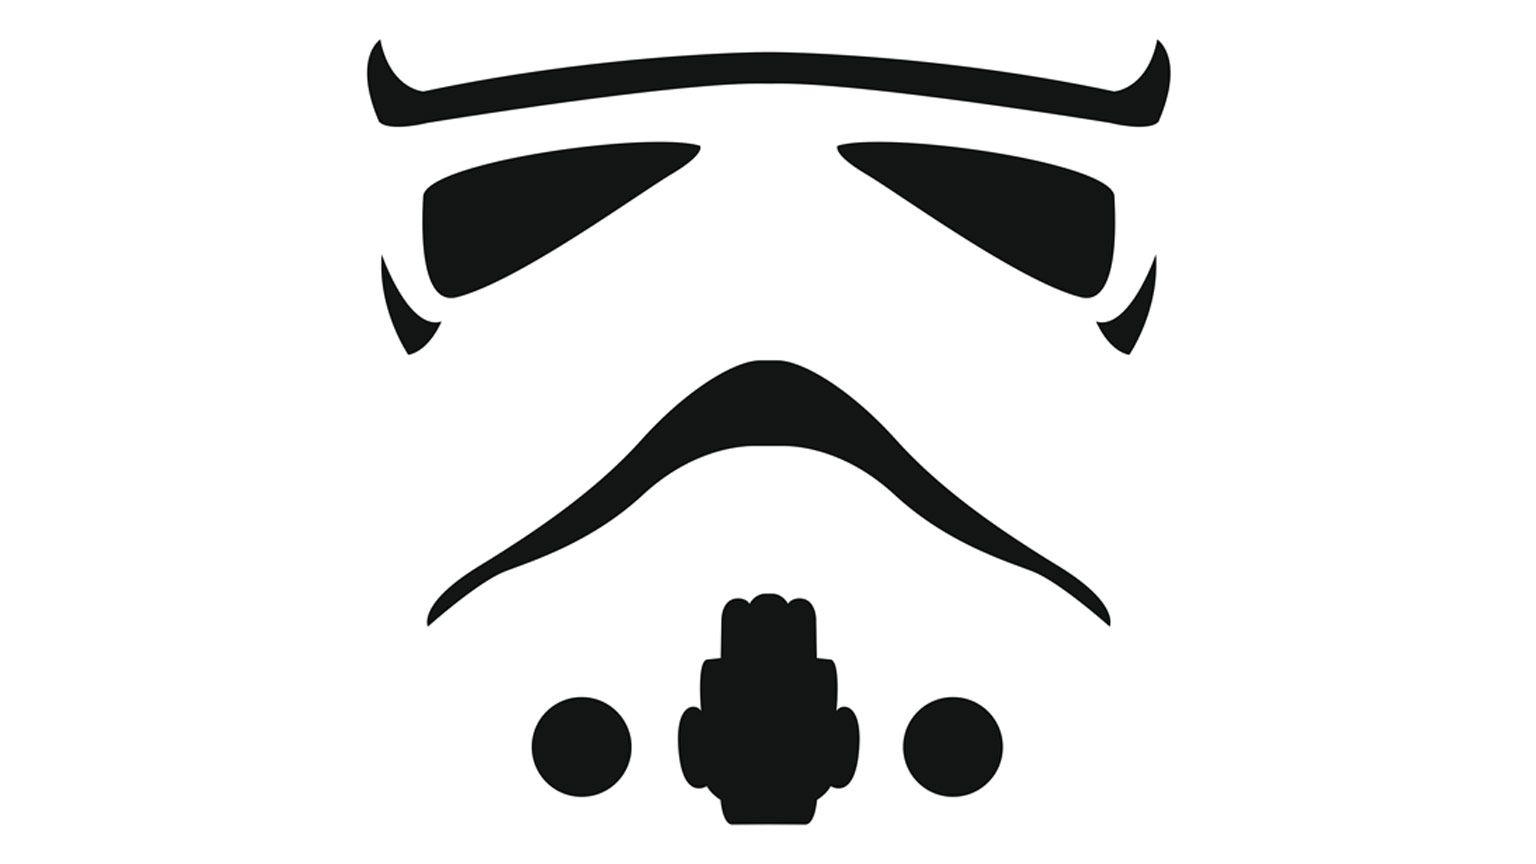 Star Wars Black and White Logo - How Stormtroopers: Beyond the Armor Celebrates the Empire's Soldiers